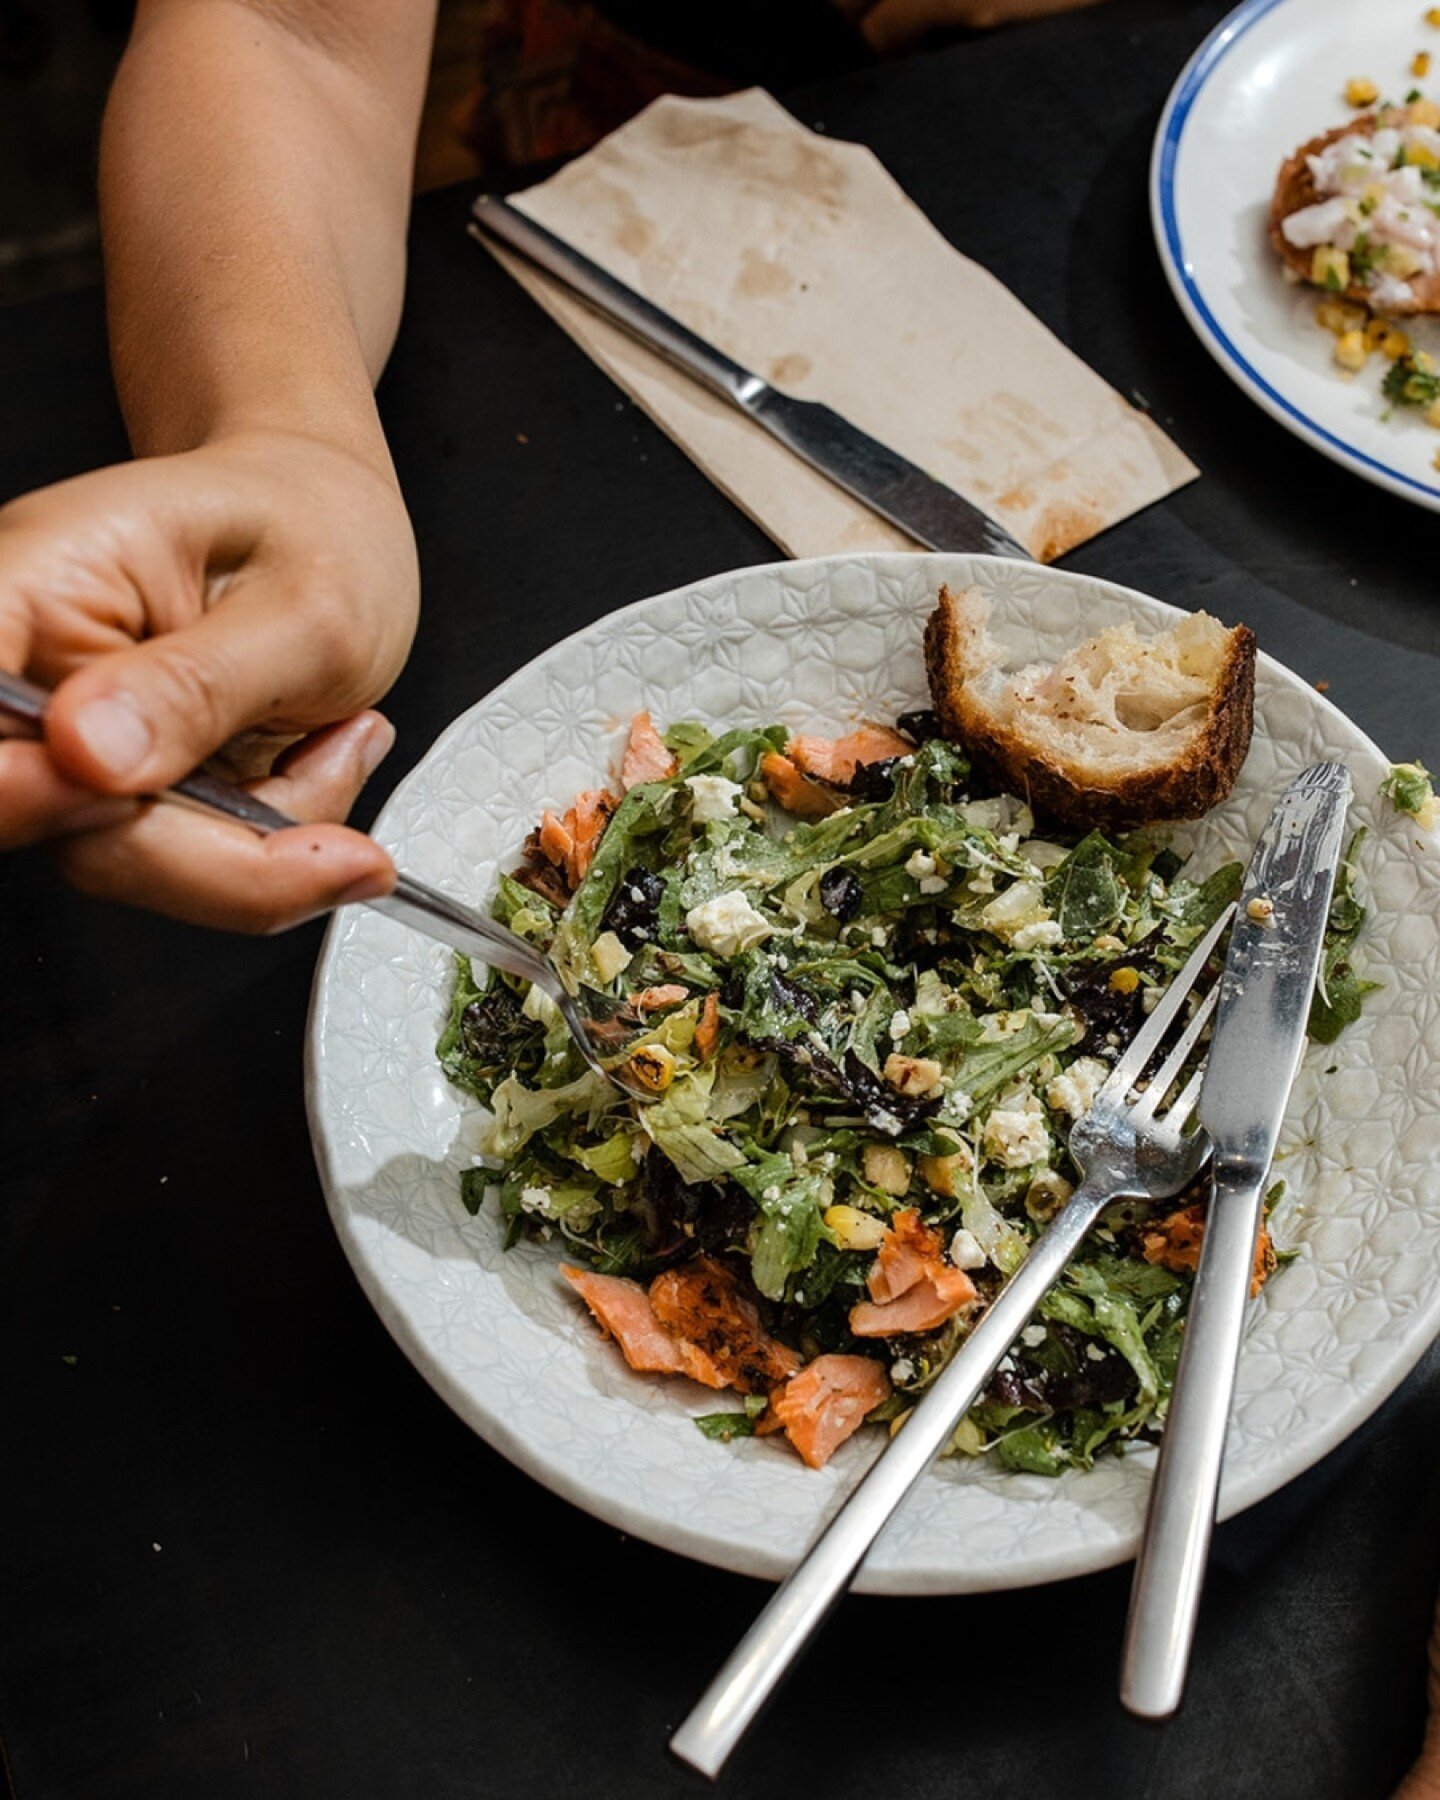 In the midst of a good time. 

The Green salad

Roast ocean trout, salad greens, sprouts, avocado, red onion pickle, herbs, sheep milk fatta, pepitas, zucchini &amp;  salsa verde.